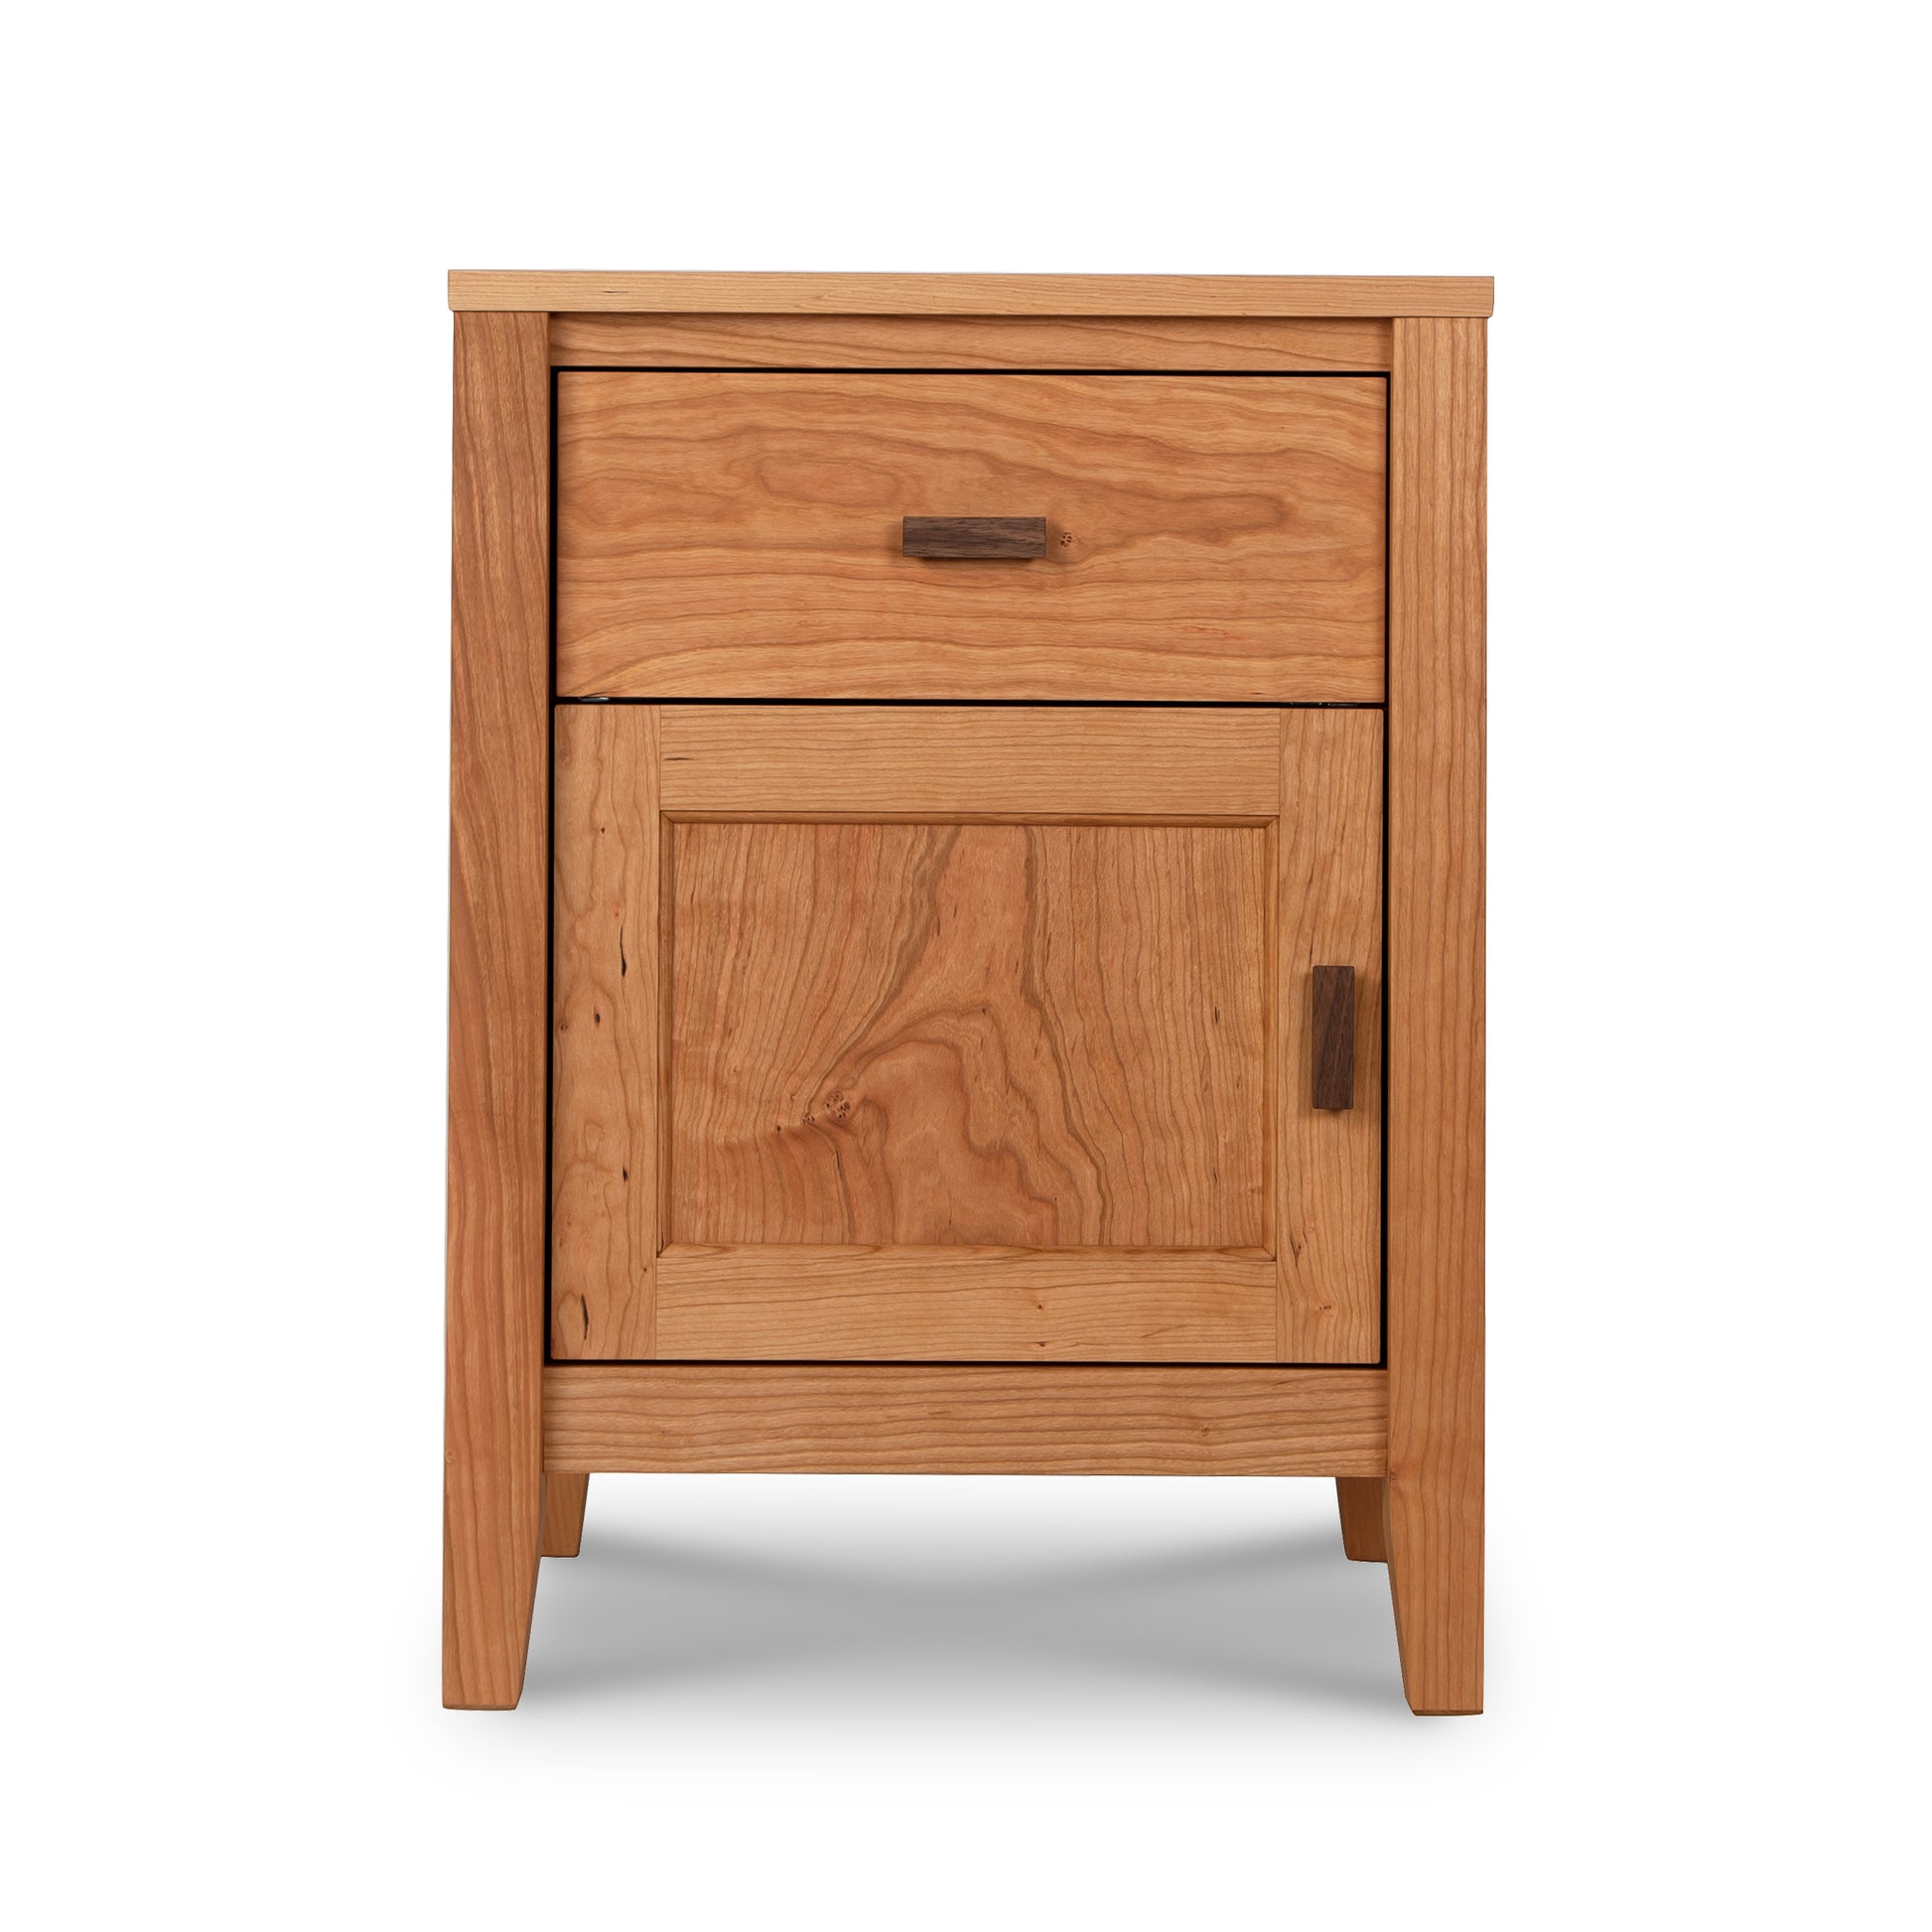 The Maple Corner Woodworks Andover Modern 1-Drawer Nightstand with Door is a stylish and compact nightstand made from sustainably sourced hardwoods.